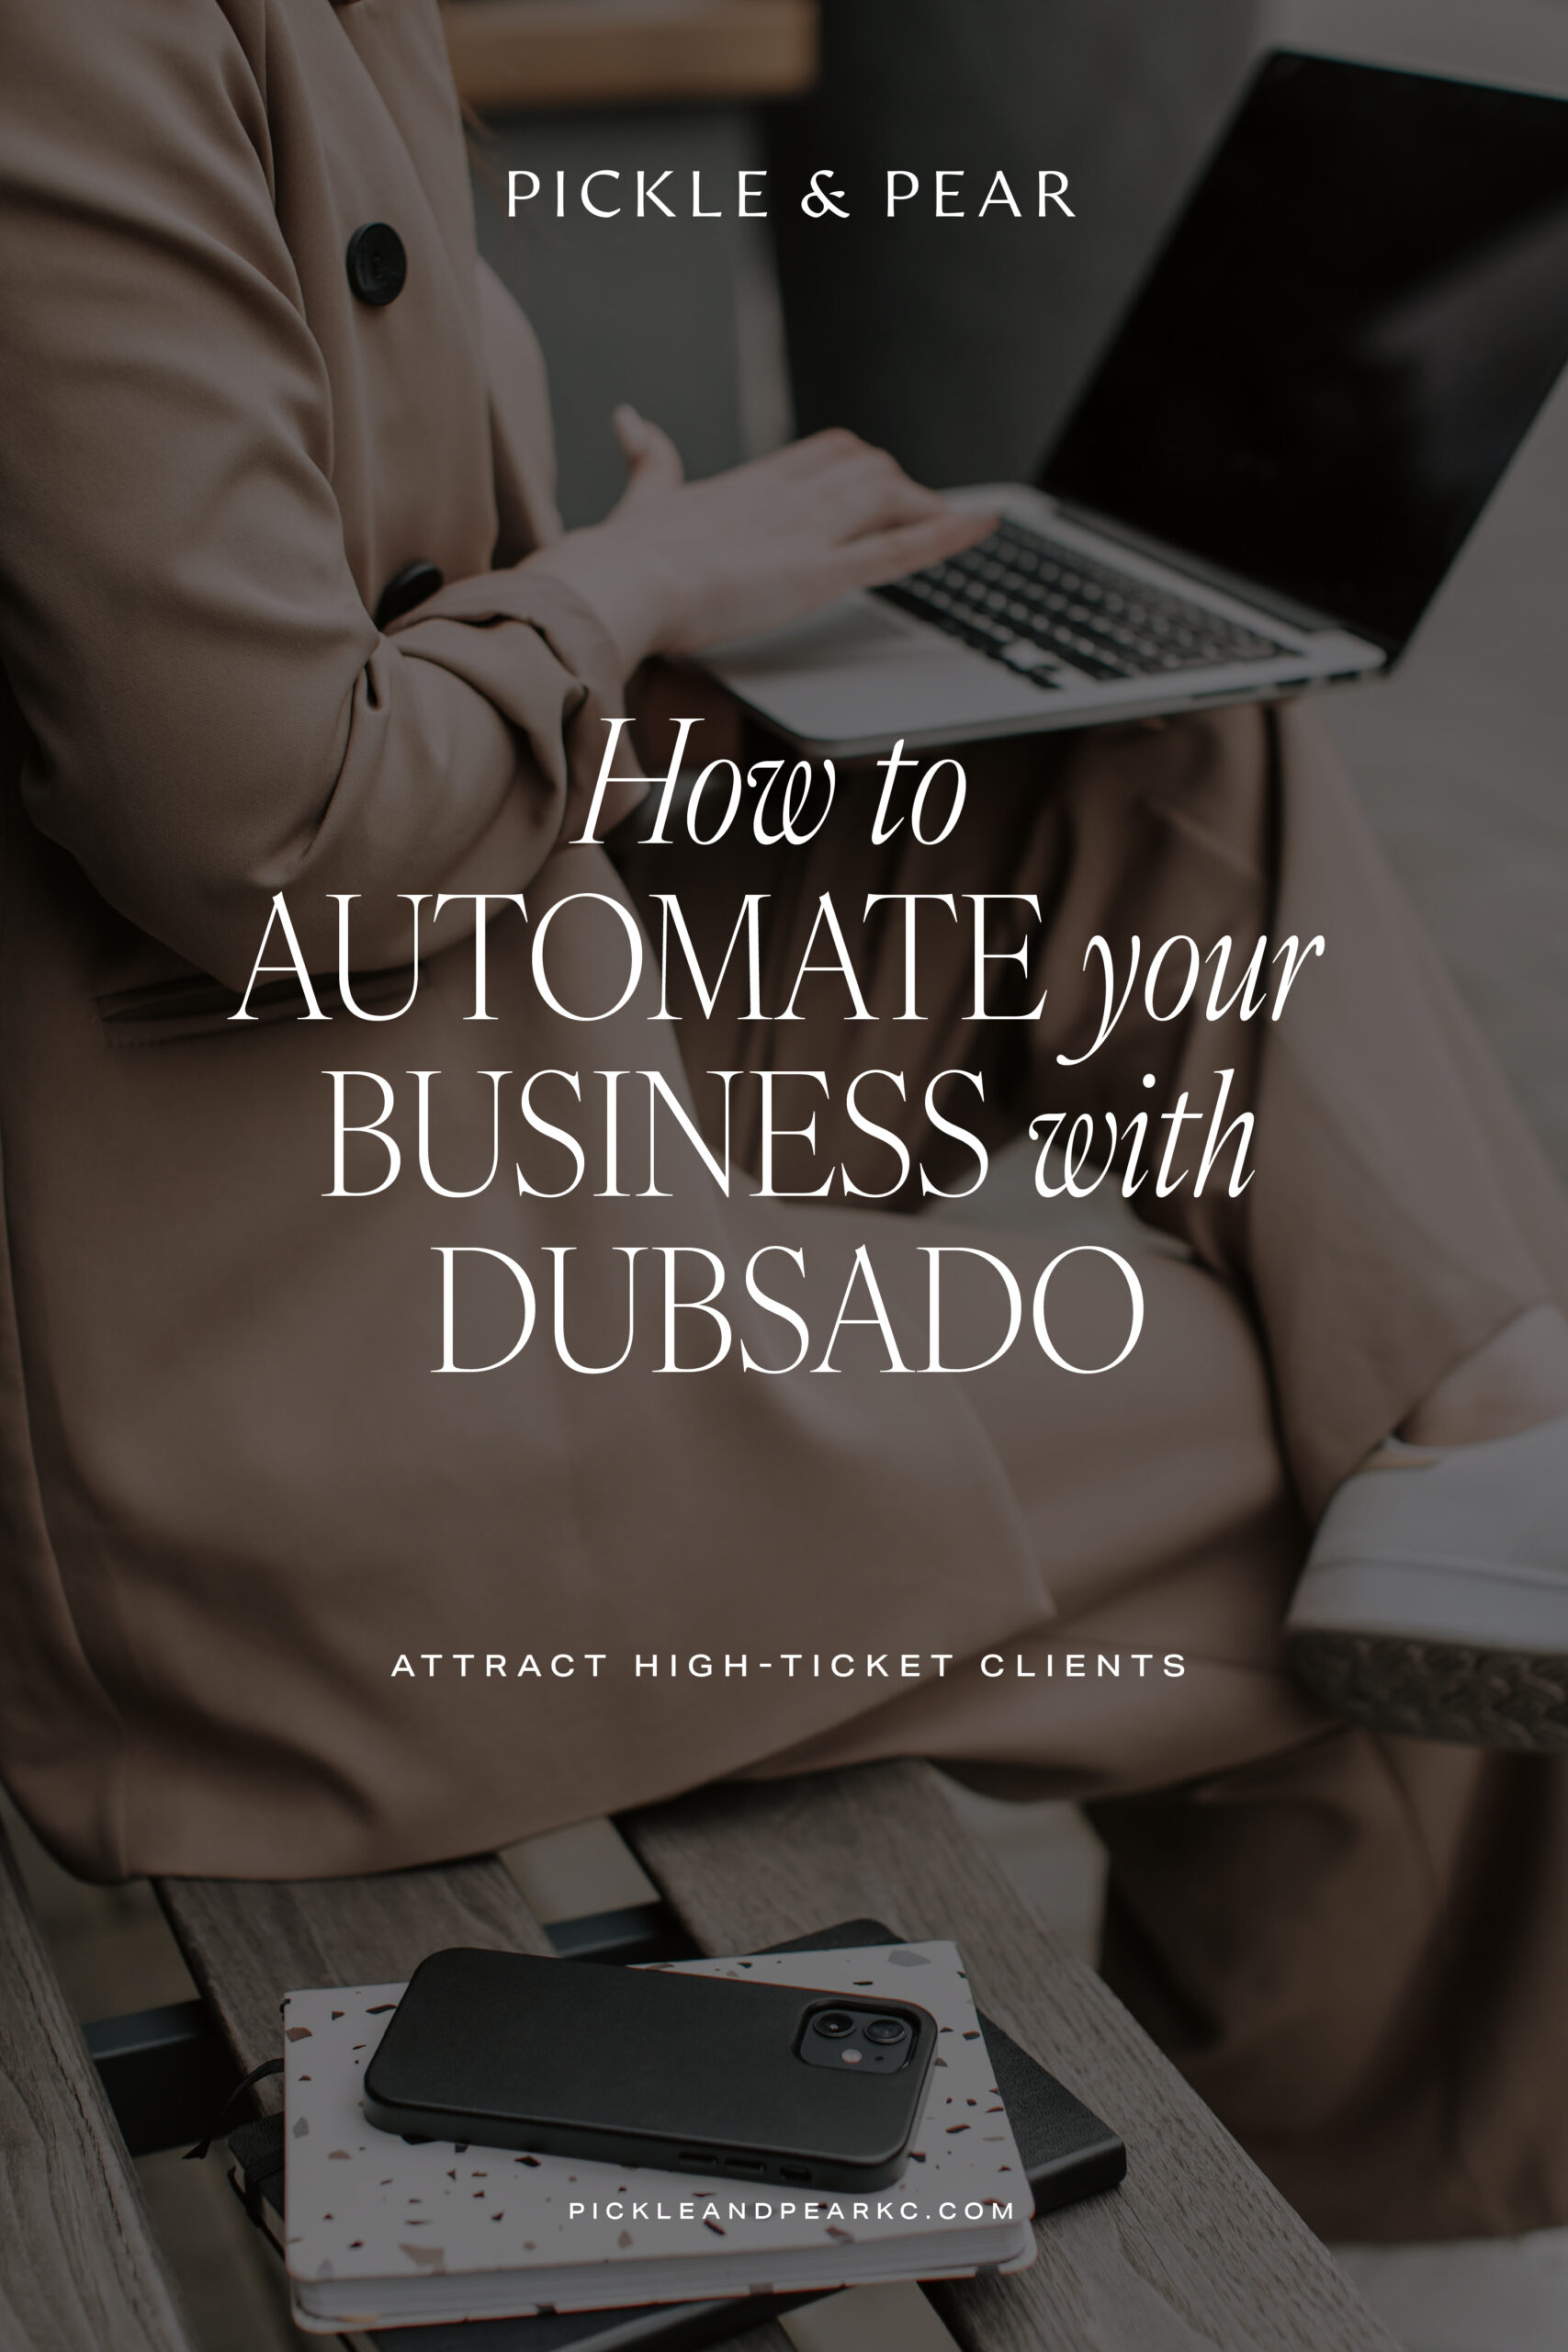 How to Automate Your Business With Dubsado